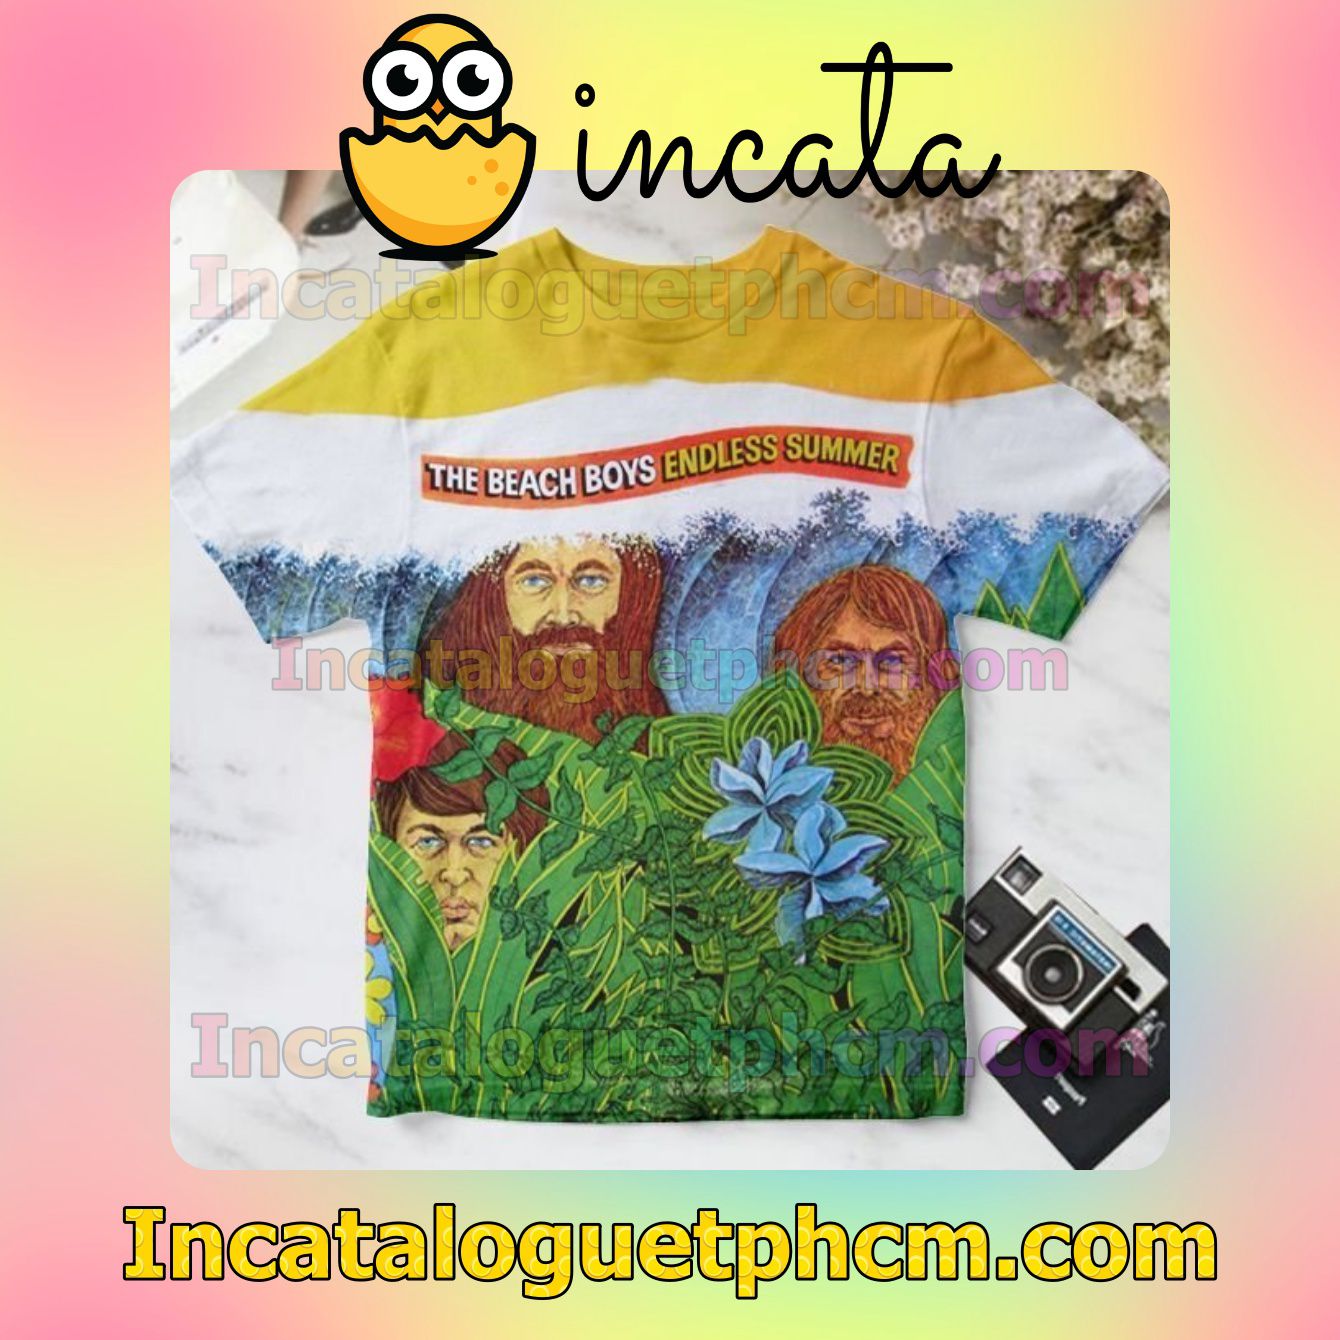 The Beach Boys Endless Summer Album Cover Personalized Shirt